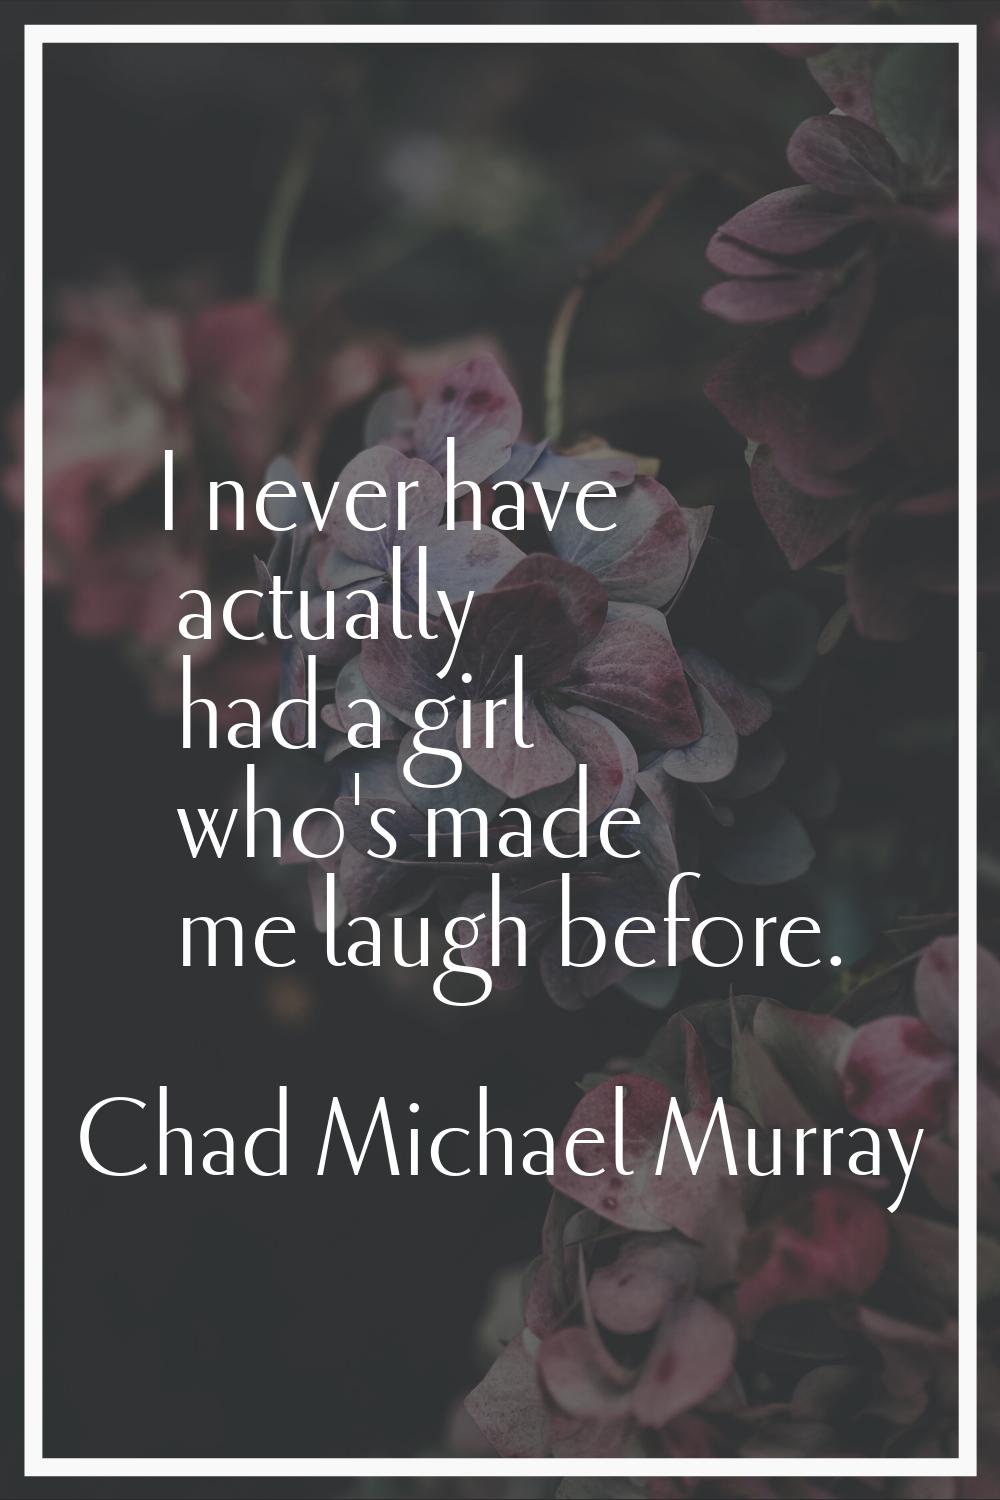 I never have actually had a girl who's made me laugh before.